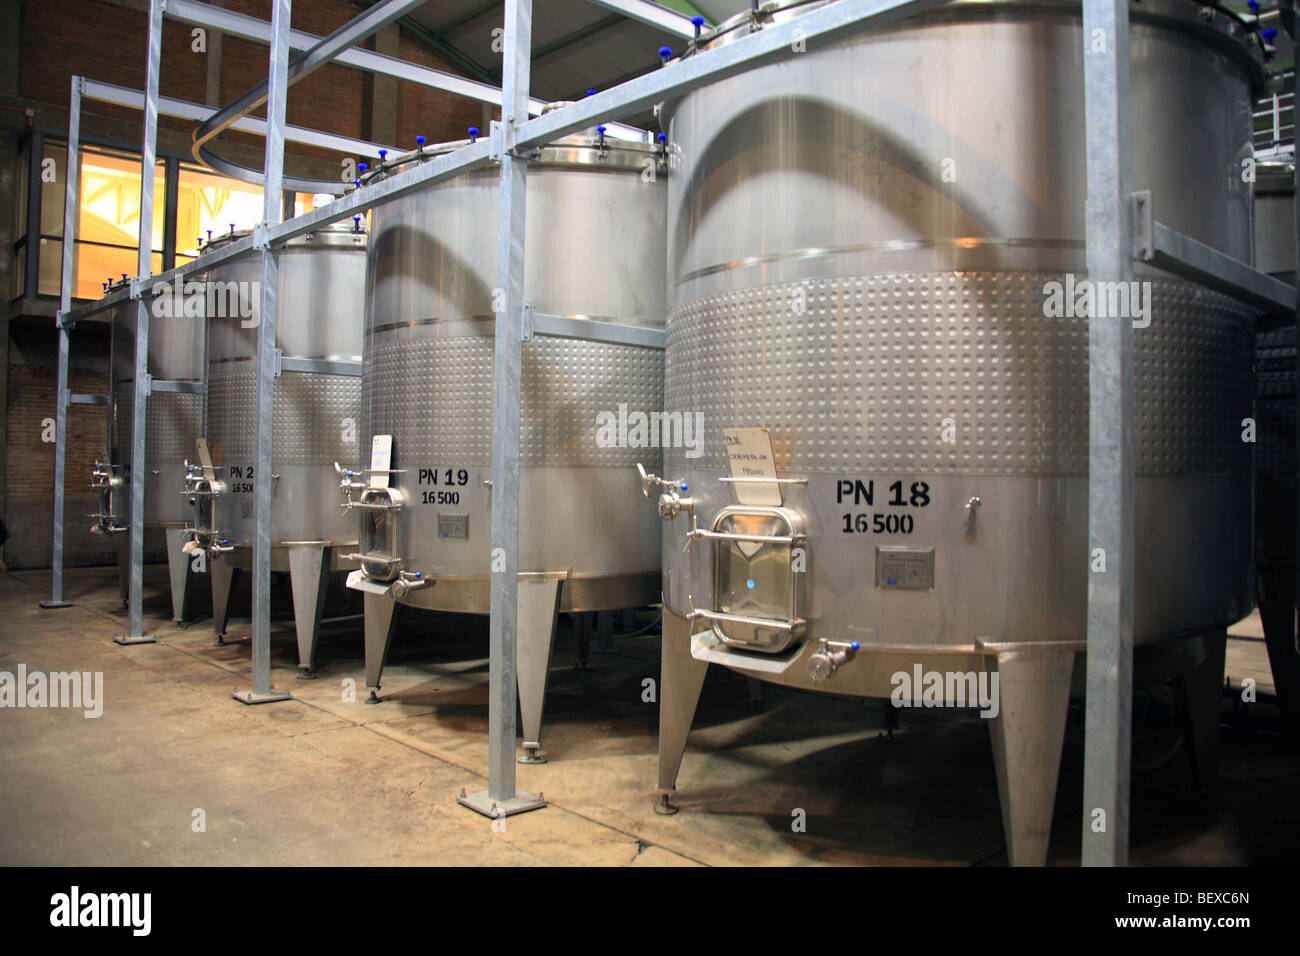 Winery with stainless tanks for grape fermentation Stock Photo